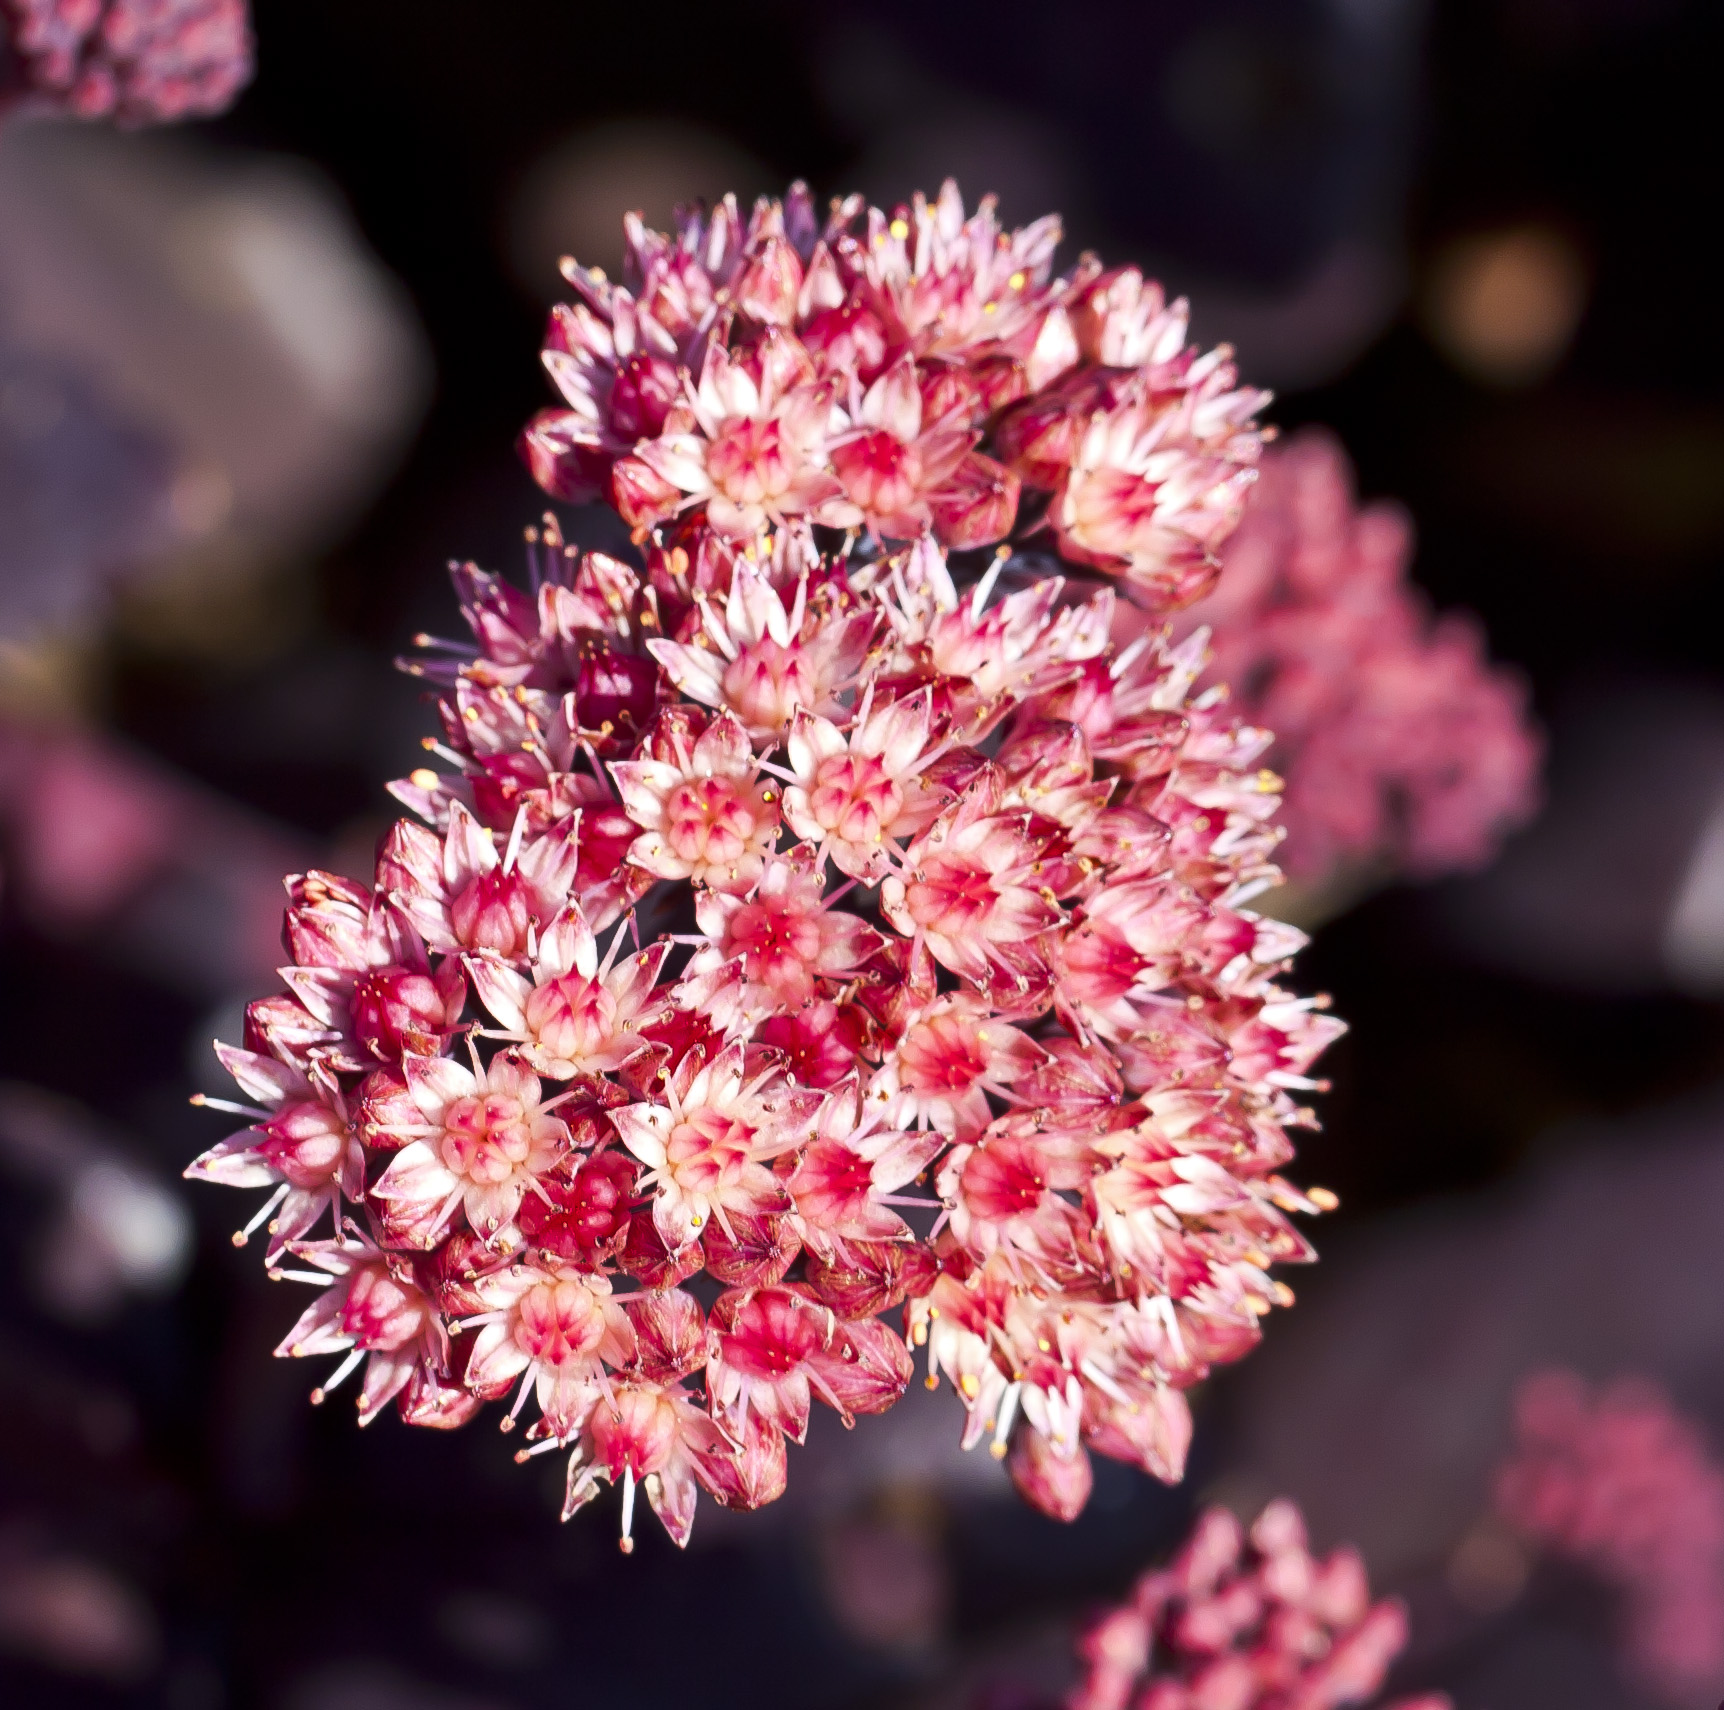 Stonecrop (Hylotelephium telephium) with white, pink and burgundy cluster of flowers 